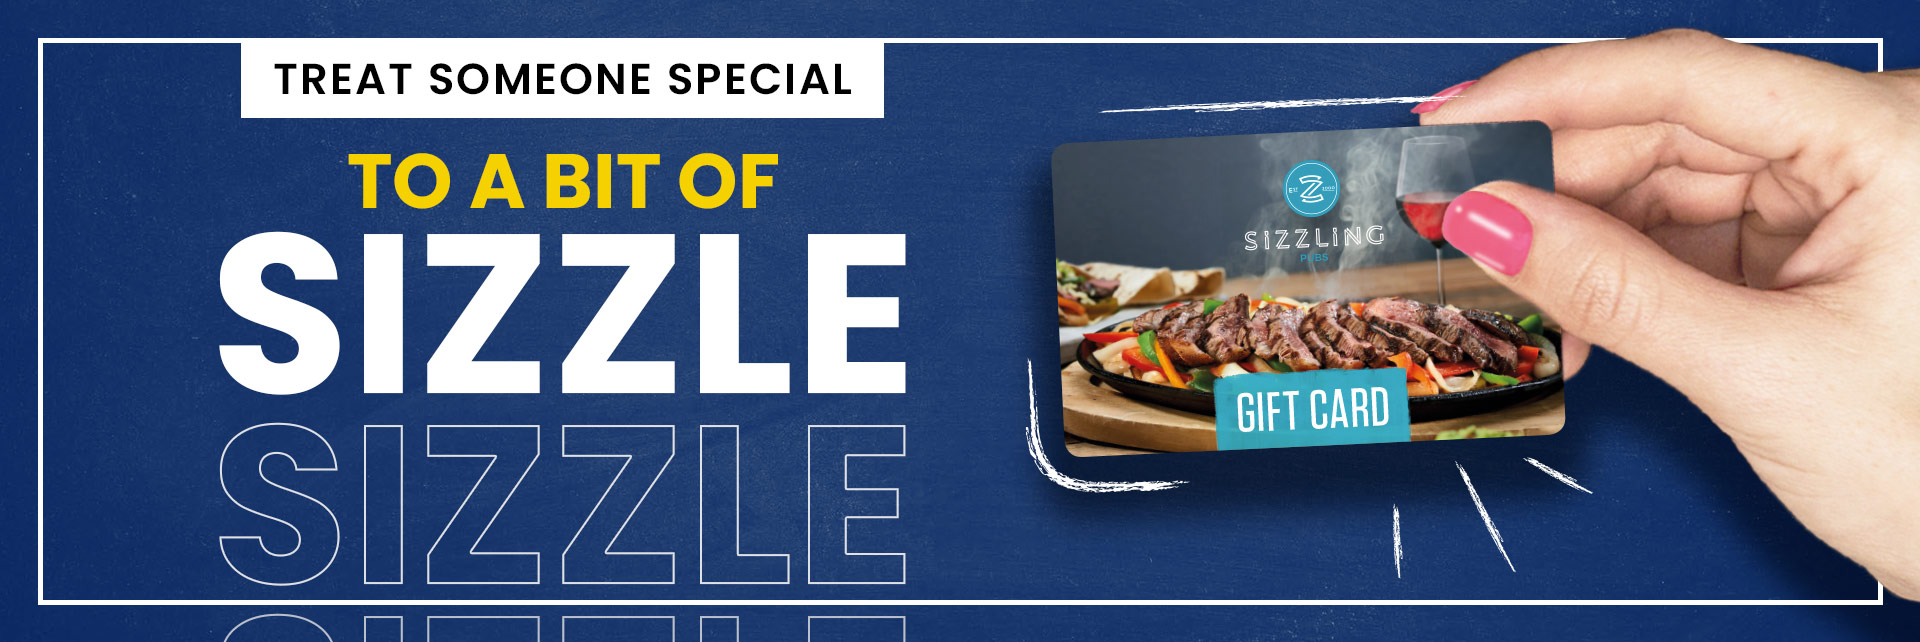 Sizzling Pubs Gift Card at Three Blackbirds, Bexley  in Bexley